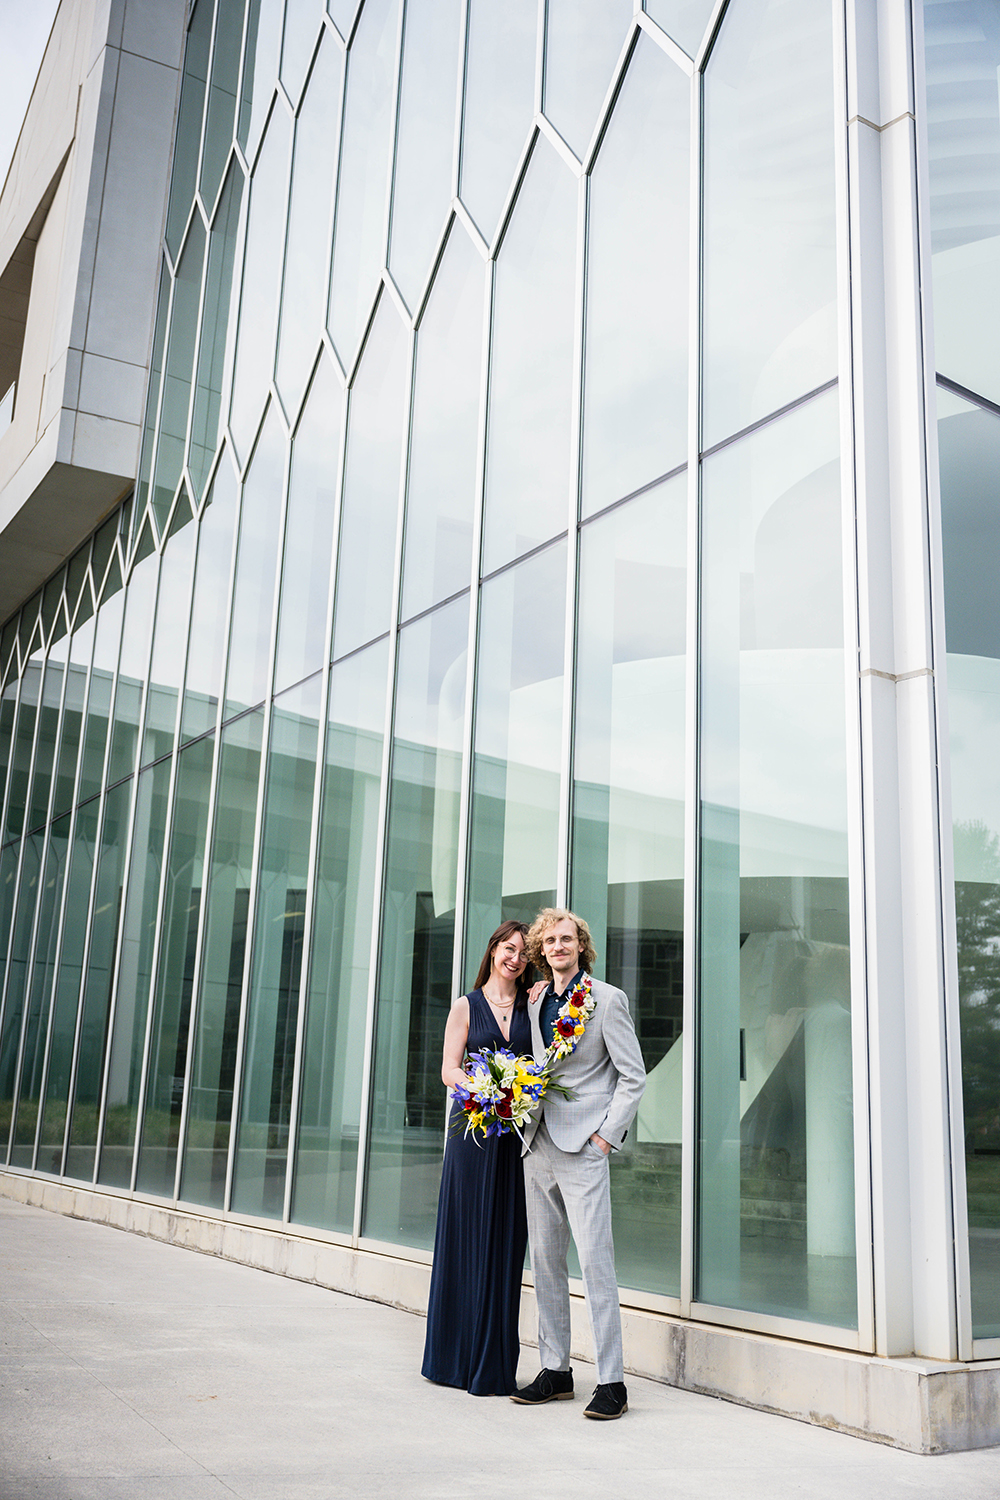 A newlywed couple poses together in front of the iconic windows of the Moss Arts Center.